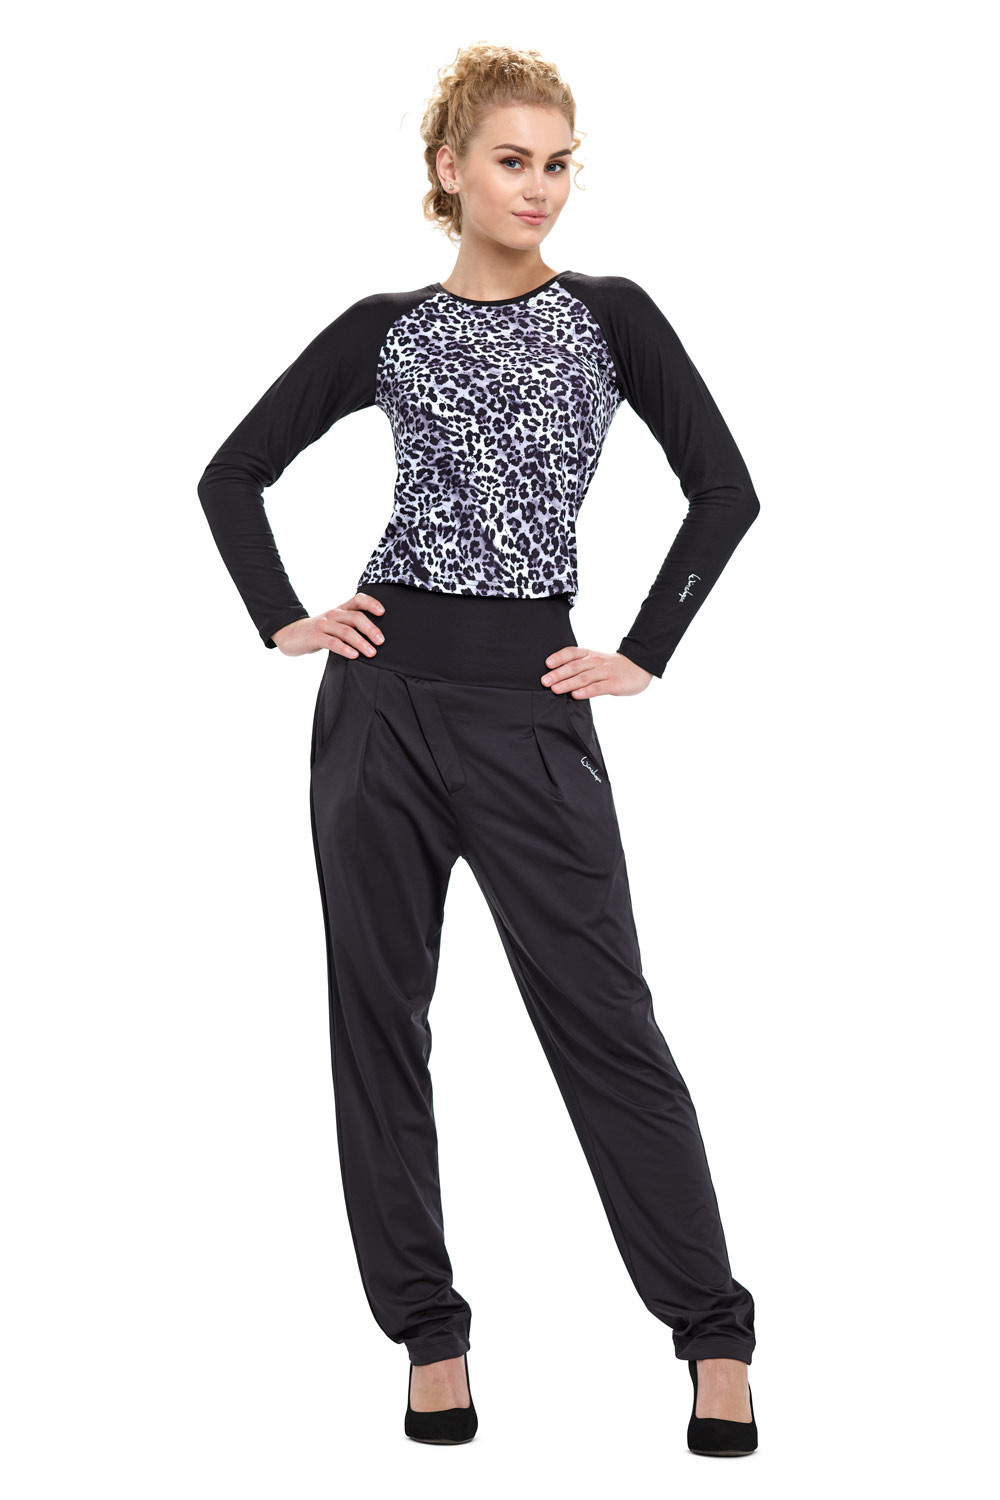 Schneeleopard, Cropped Long Sleeve Soft Style Top Winshape and AET119LS, Soft Light Functional Ultra